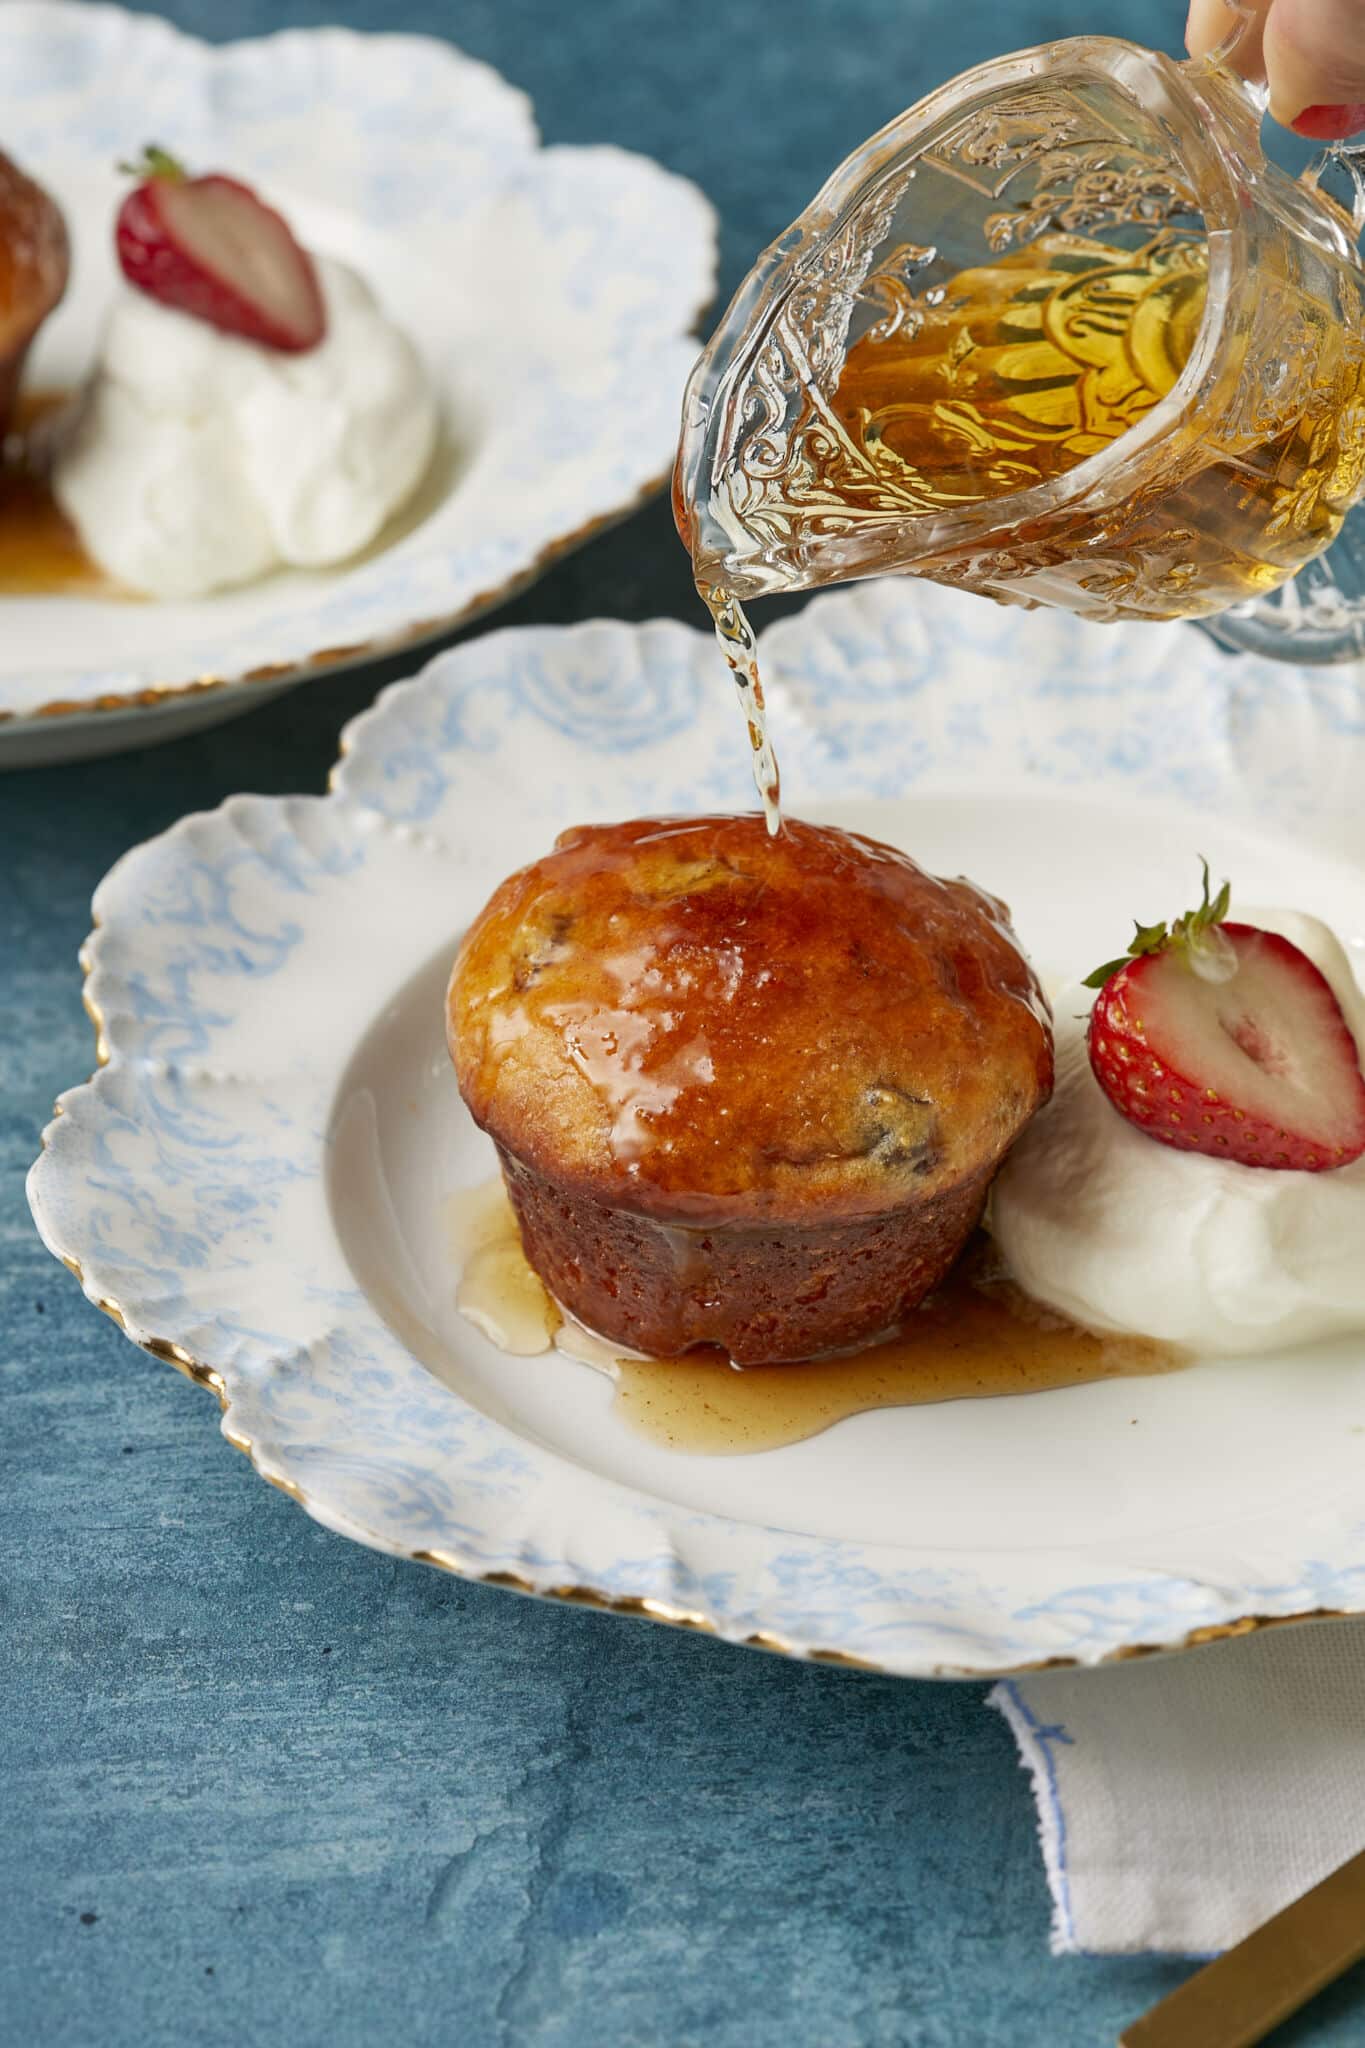 Two soft, delicate Baba au Rhum (Classic Rum Baba) cakes are served with fresh strawberry and whipped cream. Syrup is being drizzled from top to bottom.